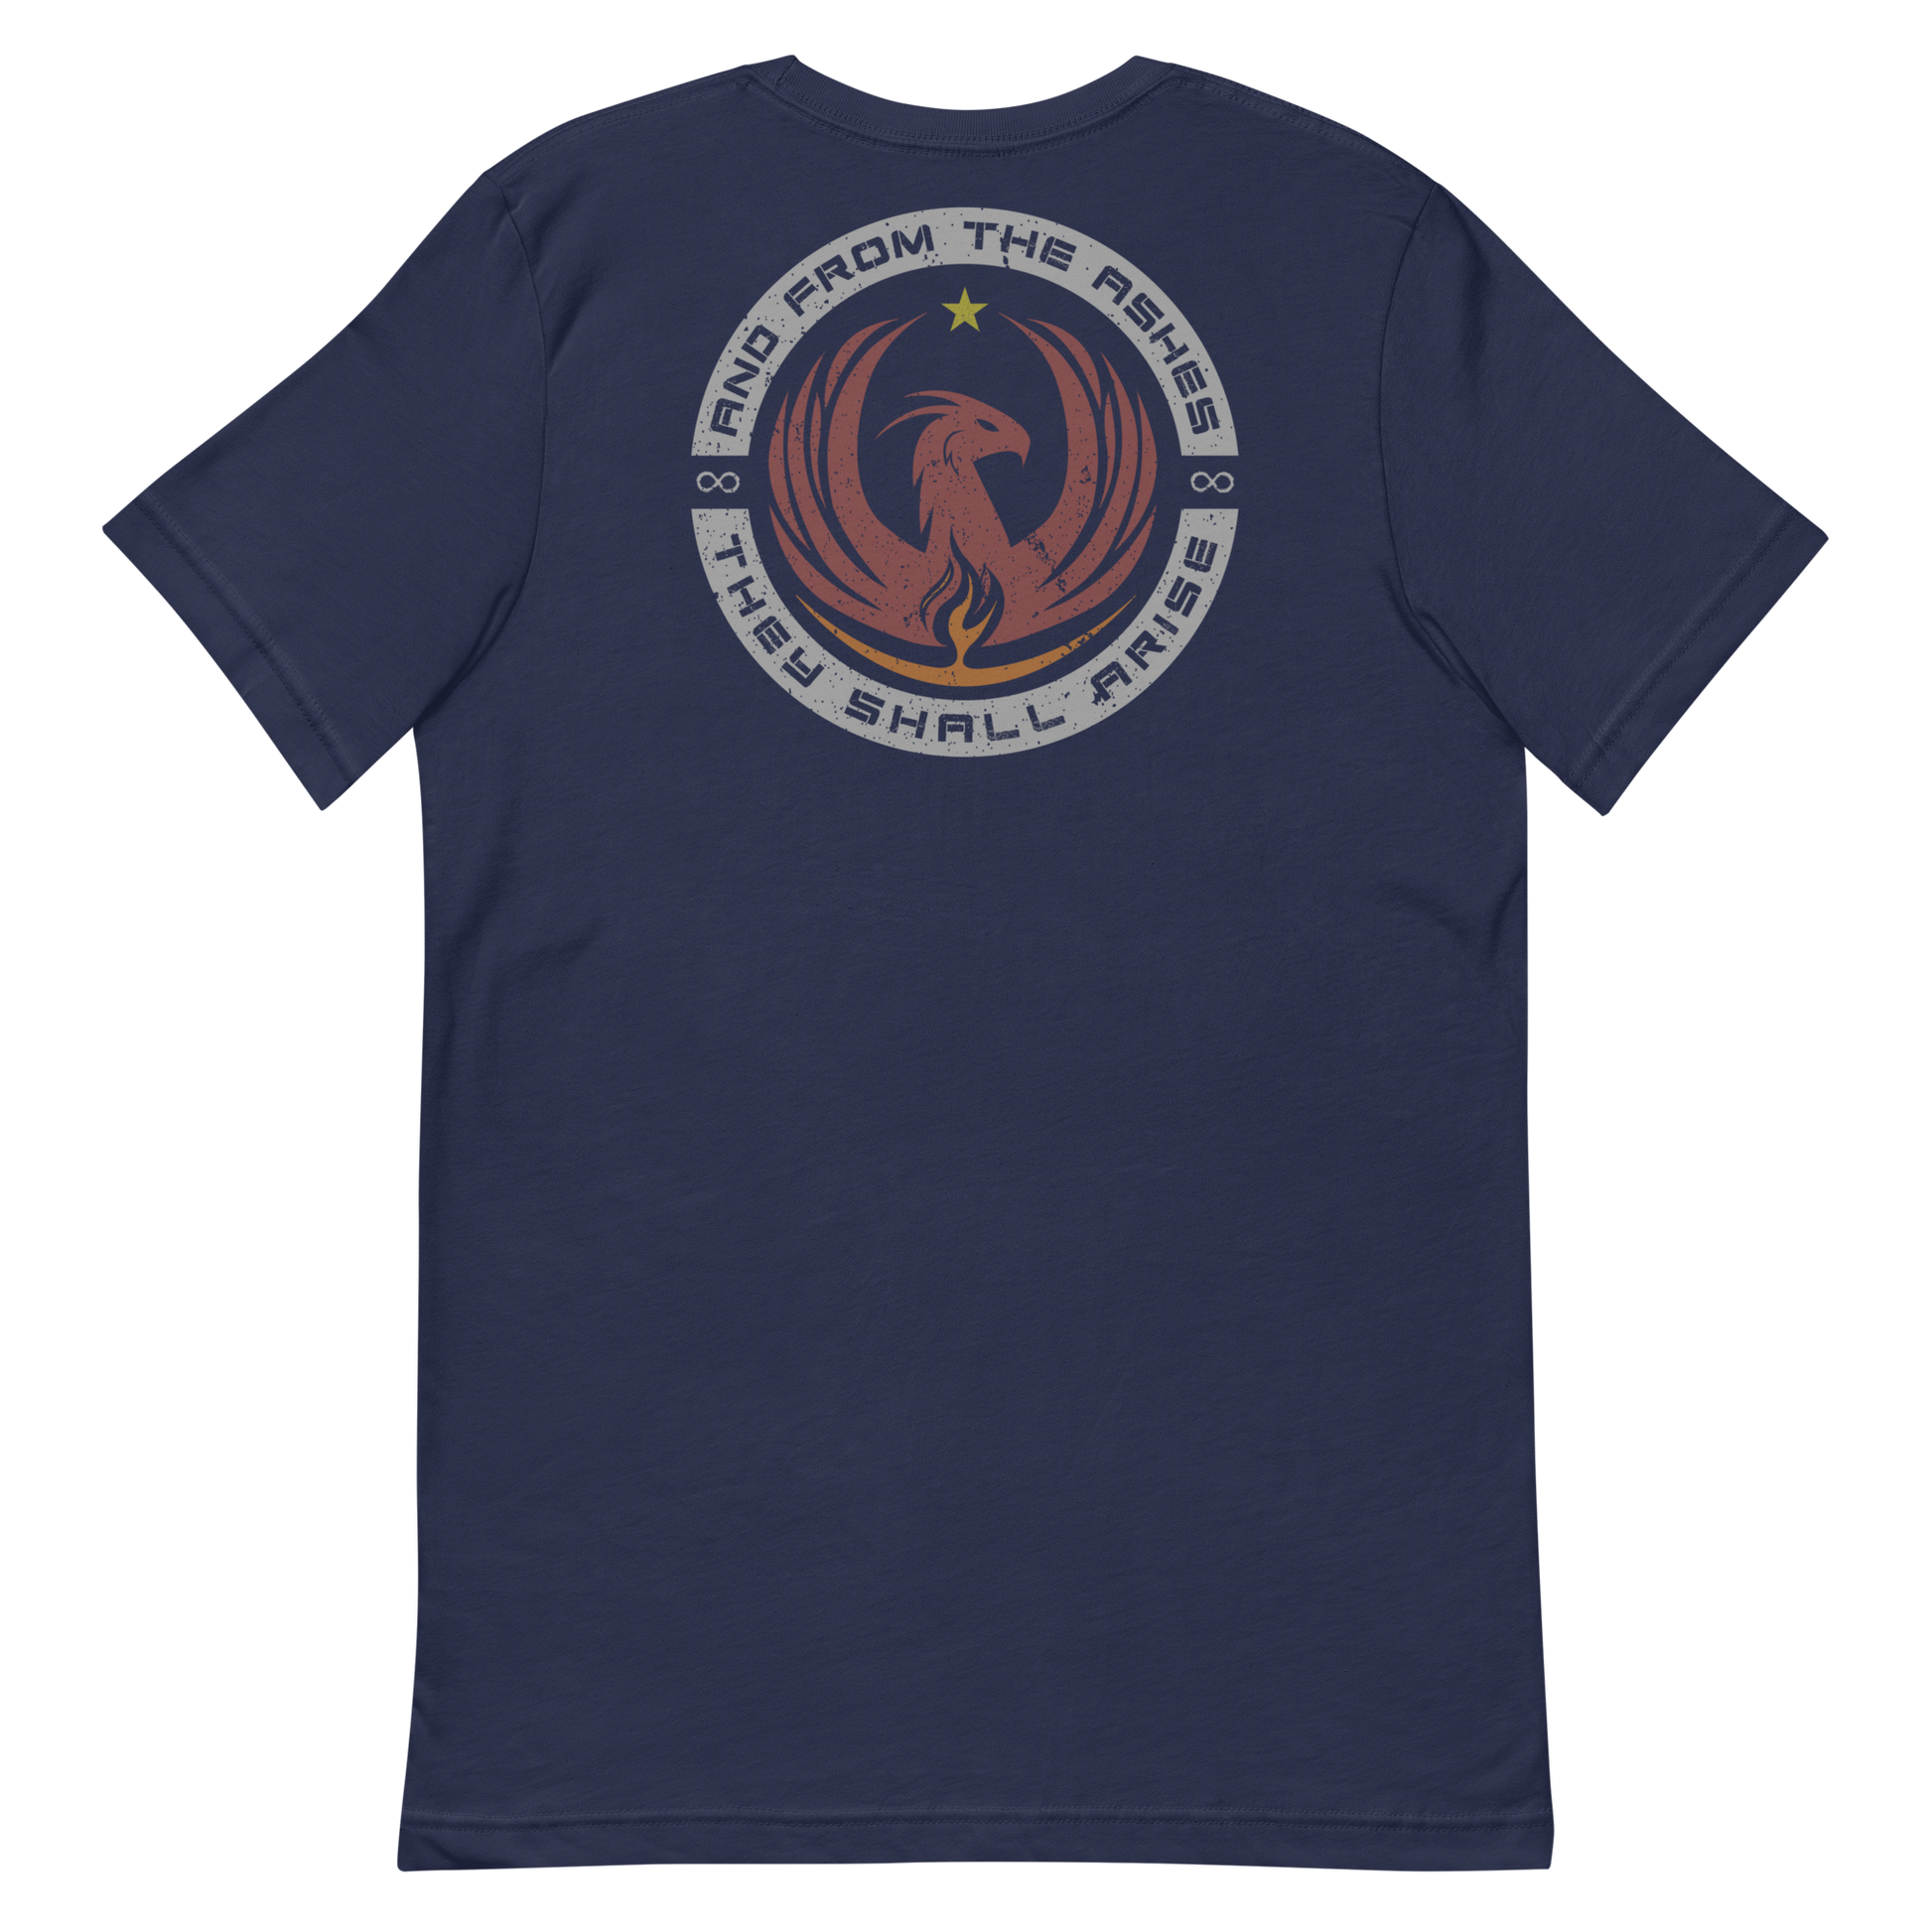 And From The Ashes Navy T-Shirt Back